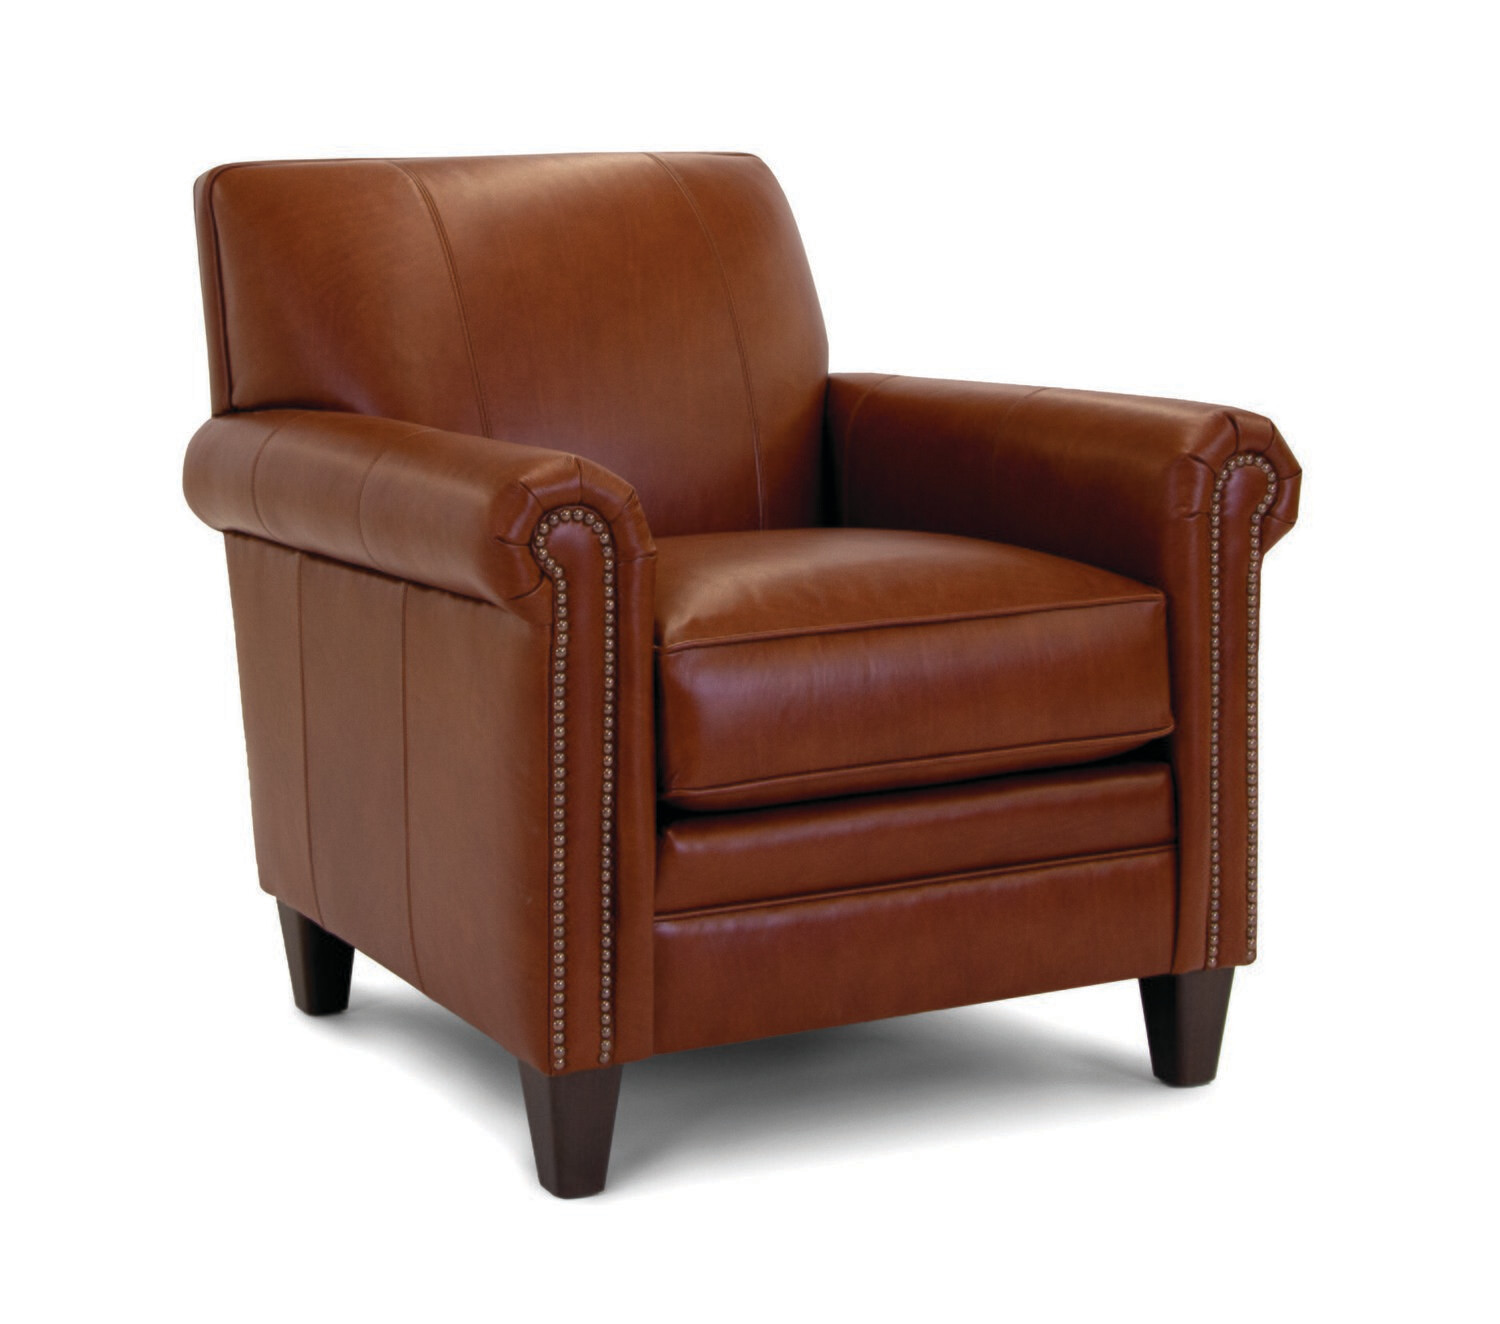 Smith Brothers 3112 Chair